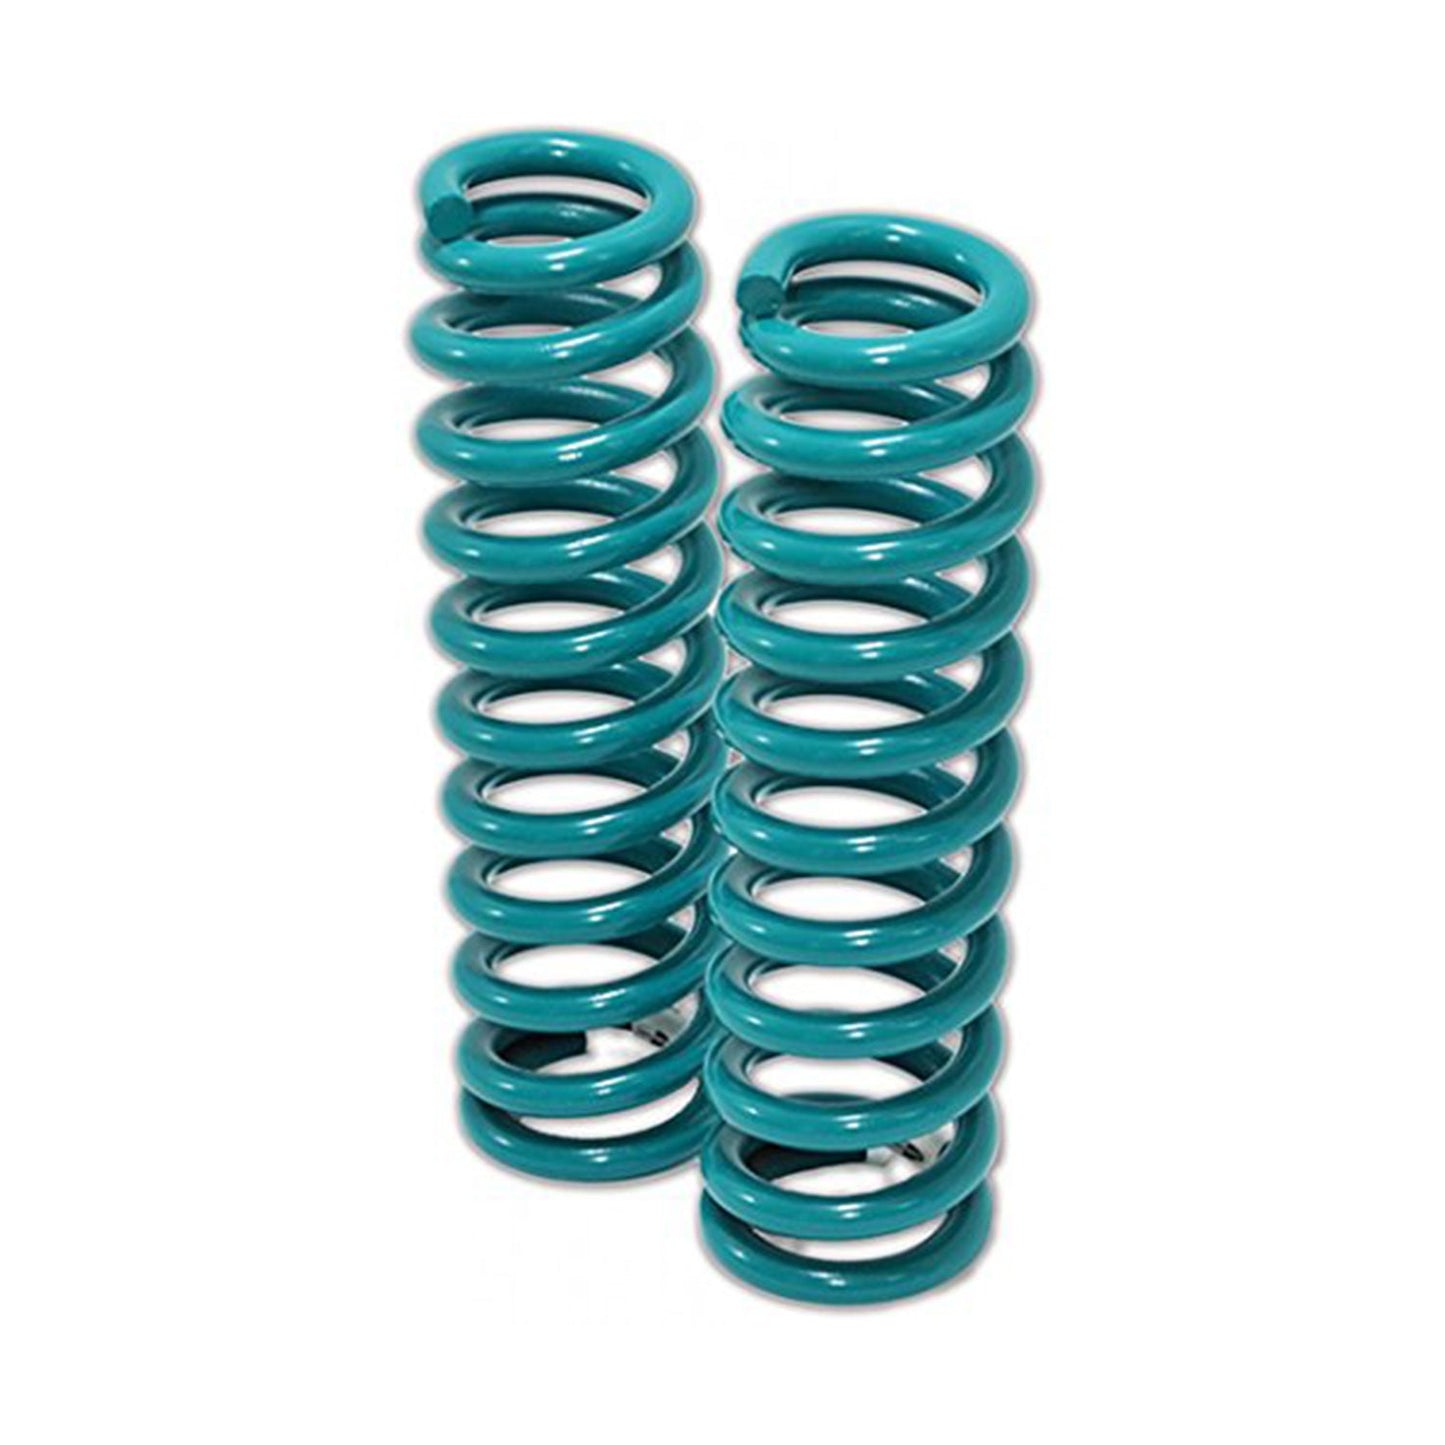 Dobinsons Front Lifted Coil Springs for Toyota 4x4 SUV's multiple (C59-276)